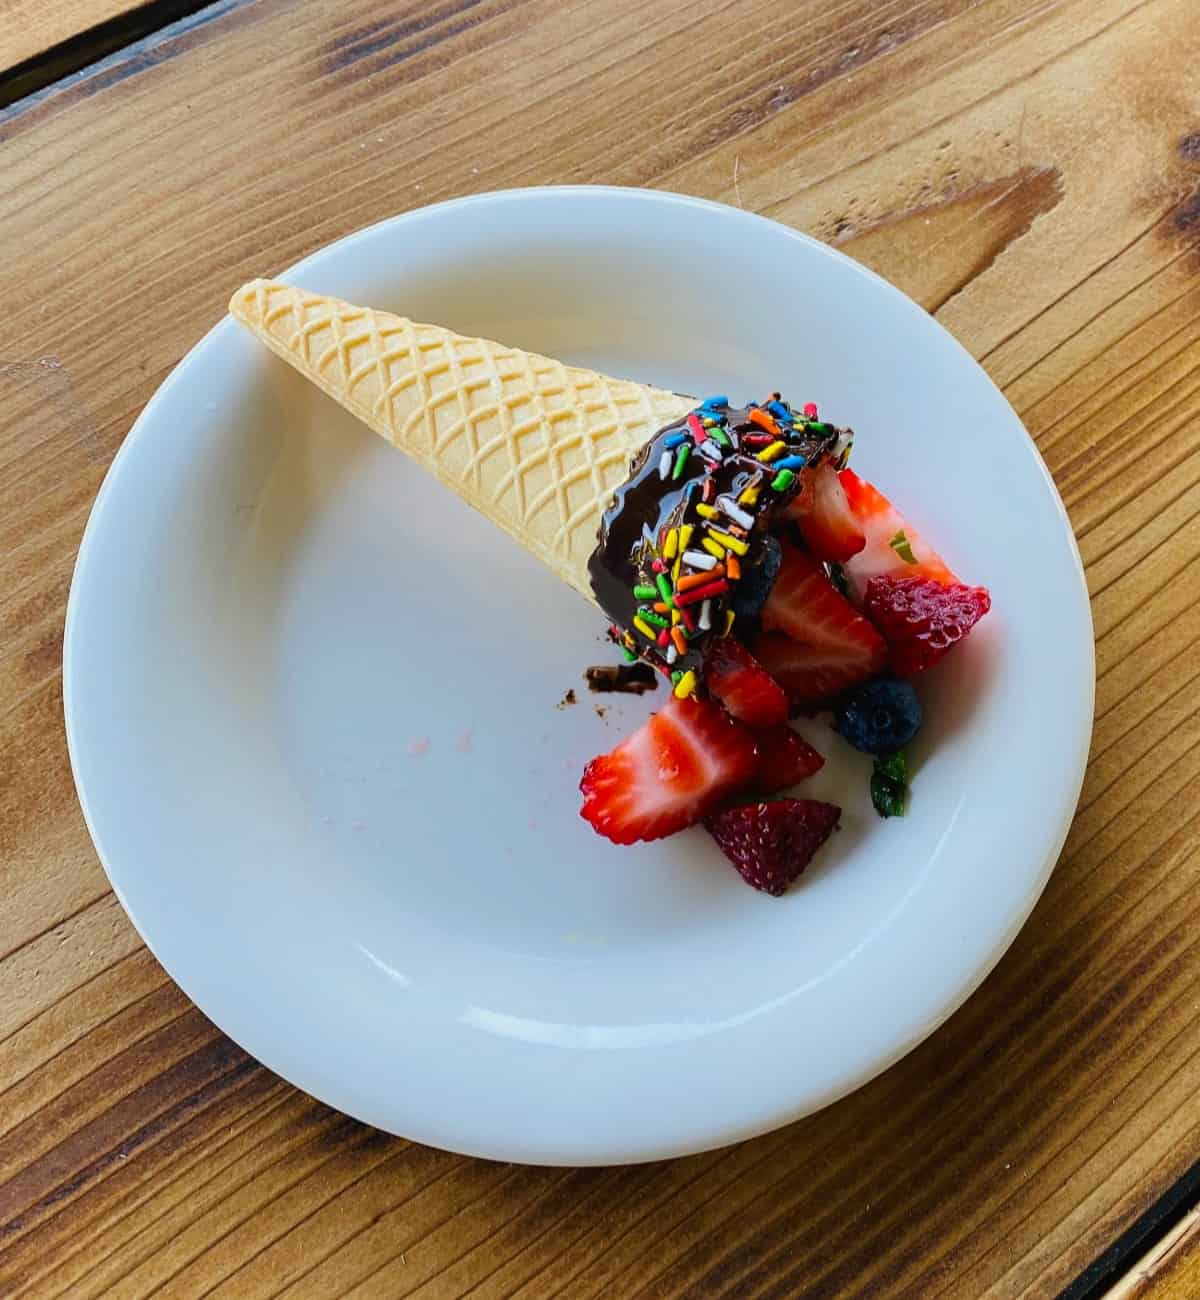 Fruit filled chocolate dipped cone in white plate on wood table.